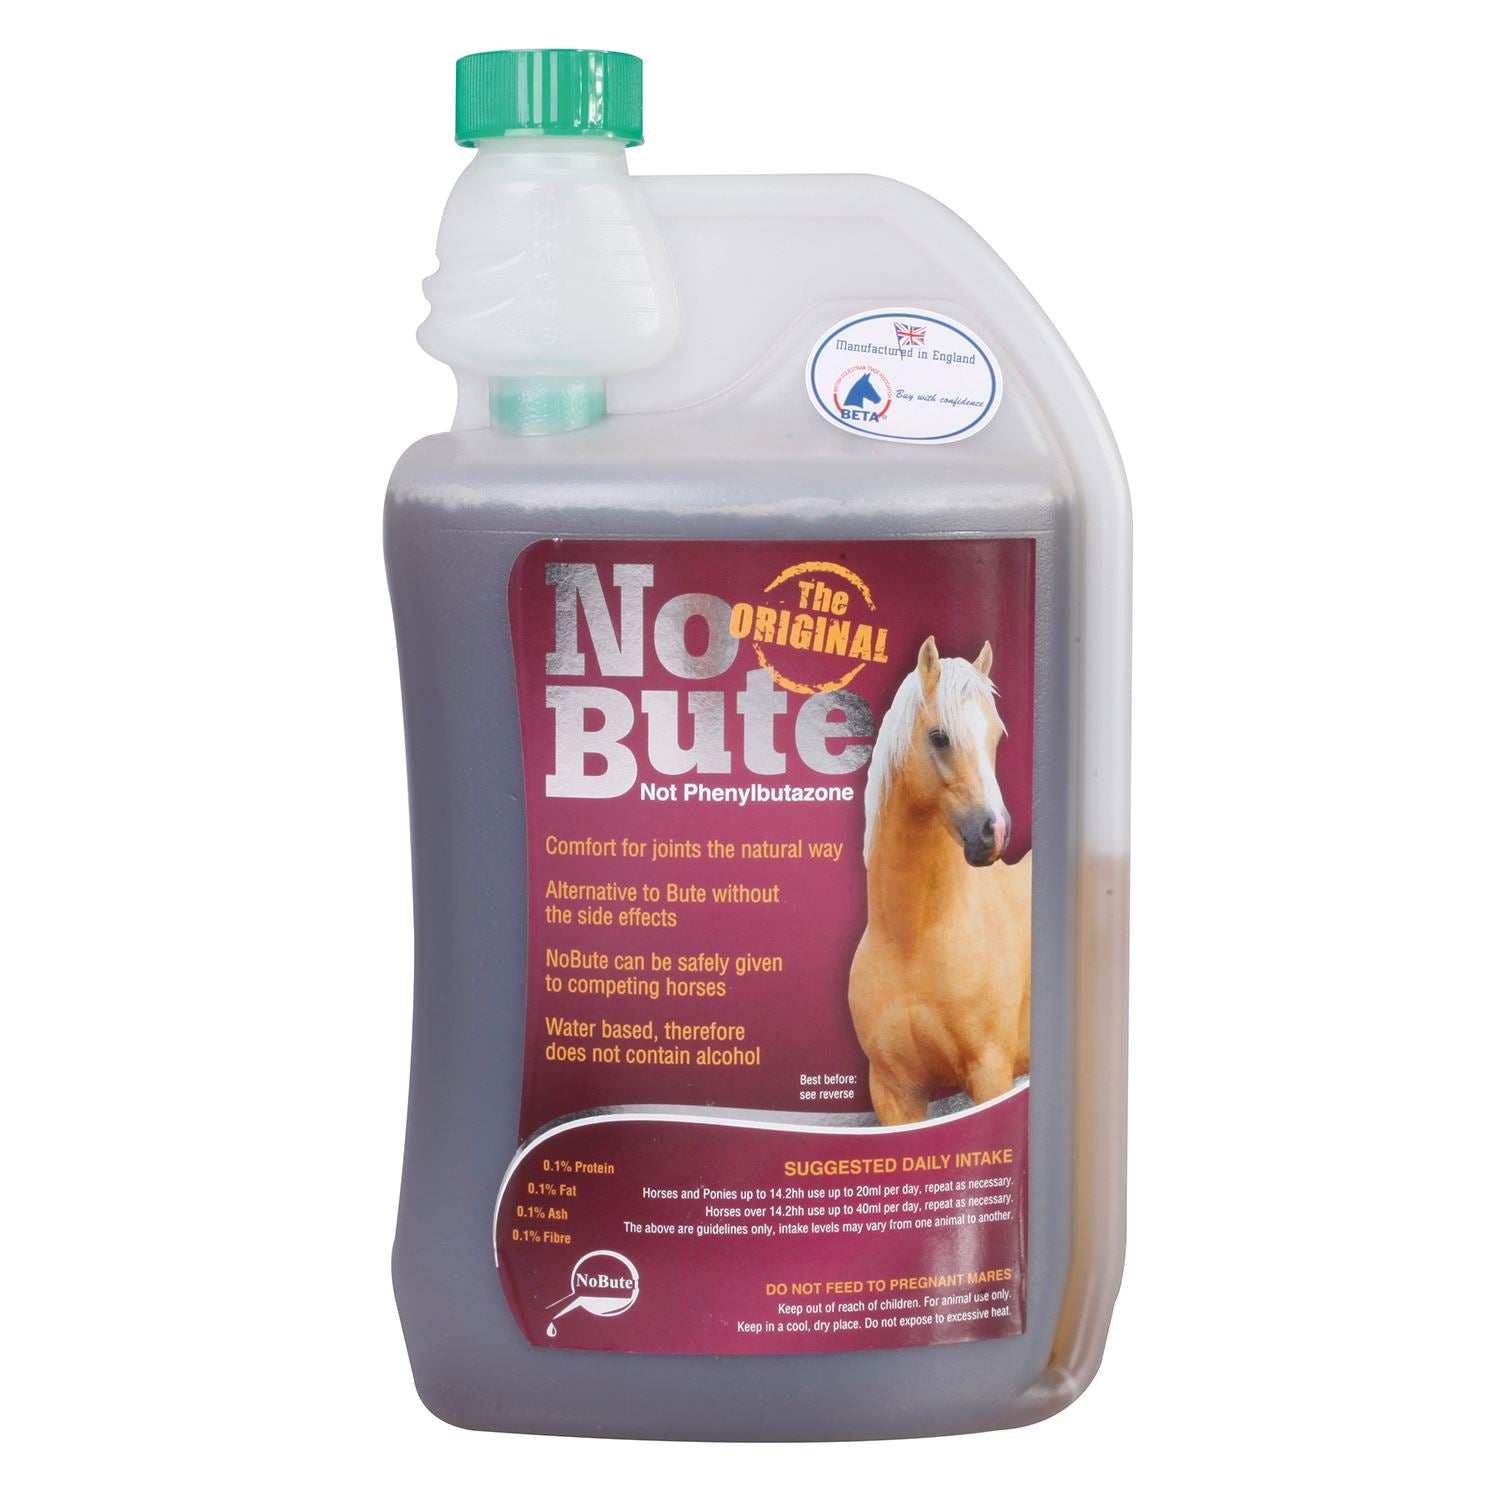 Animal Health Company No-Bute offers a natural joint health solution